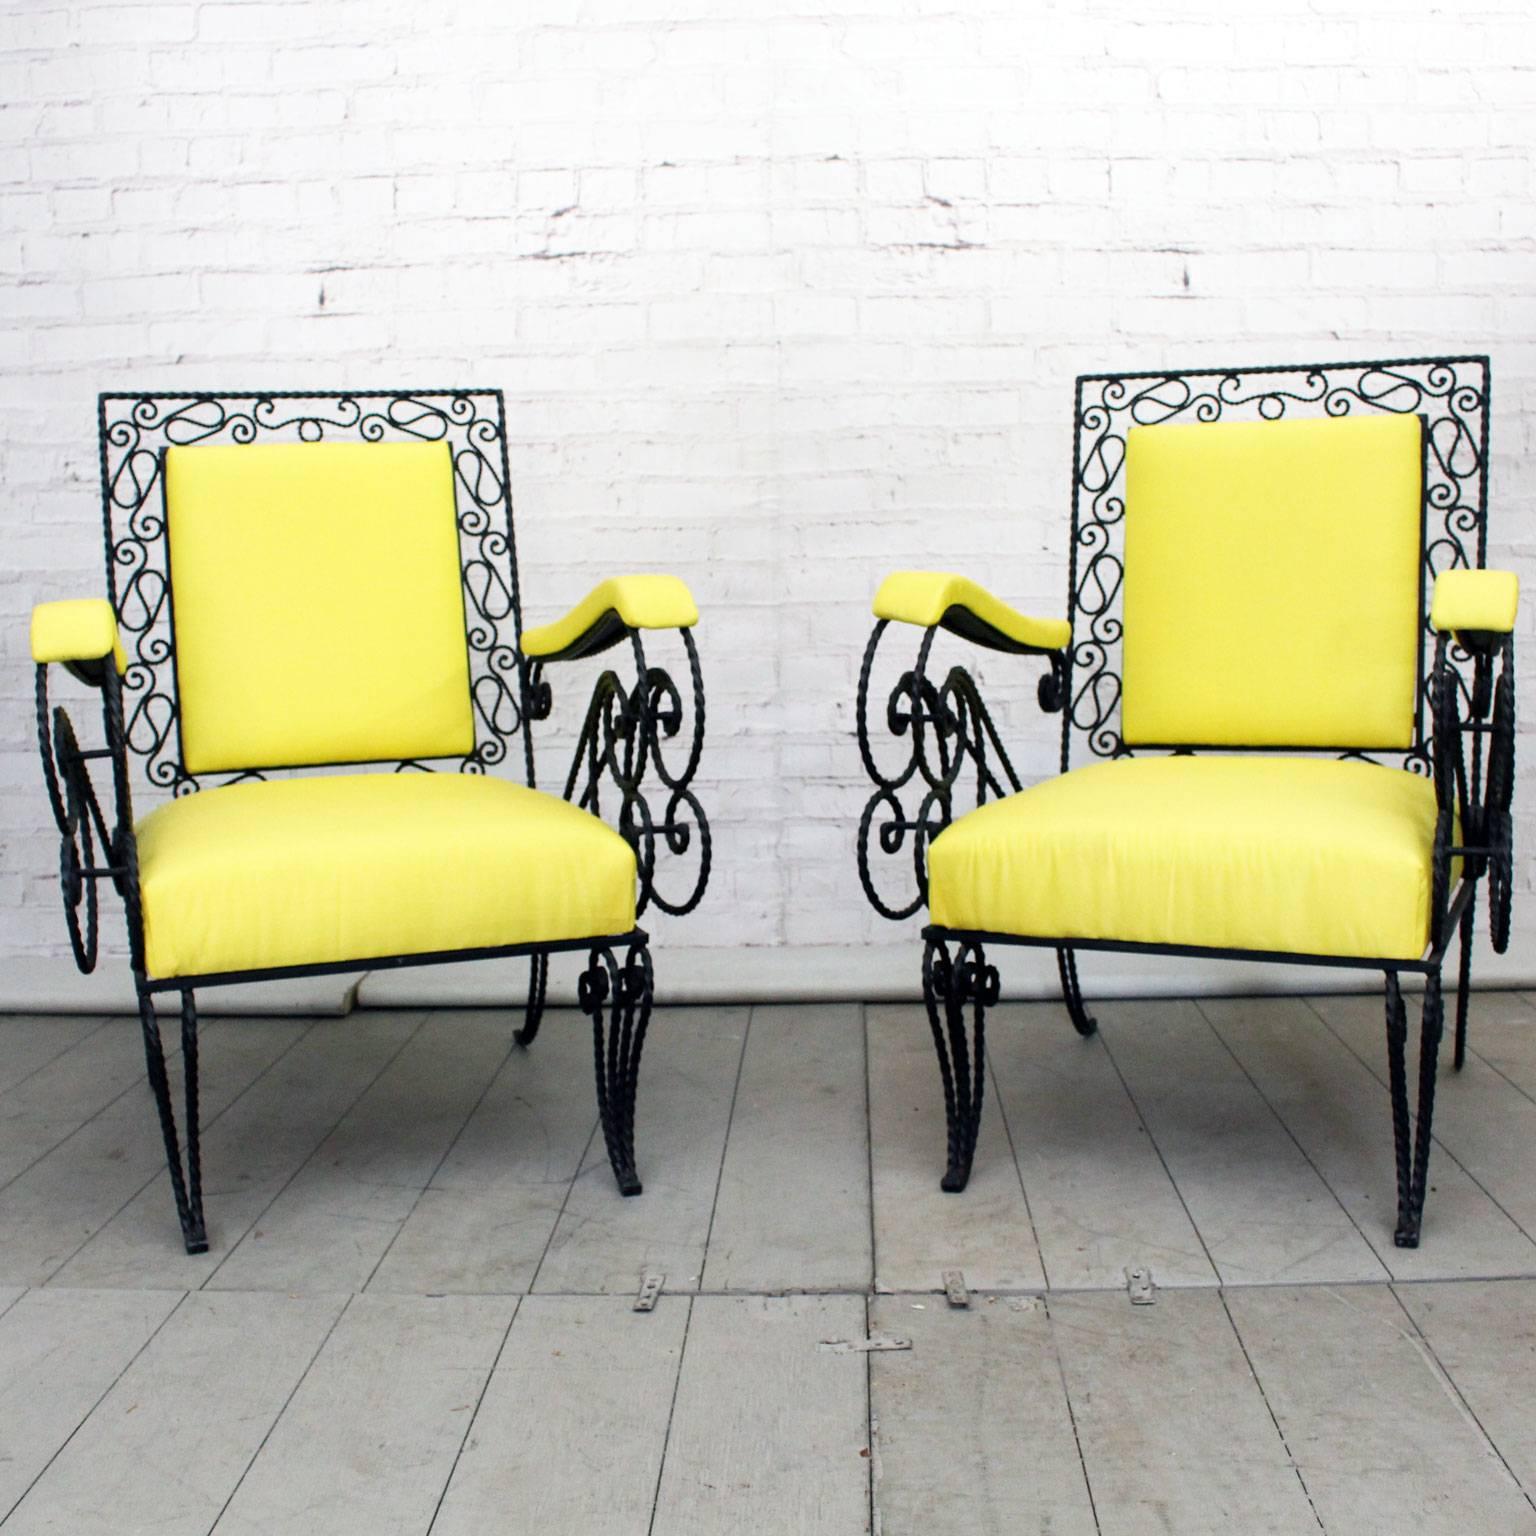 This very fine pair of ornate French armchairs has been reupholstered in yellow silk. They would work just as well inside or out. We love the three dimensional aspect of the twisted black metal work.
 